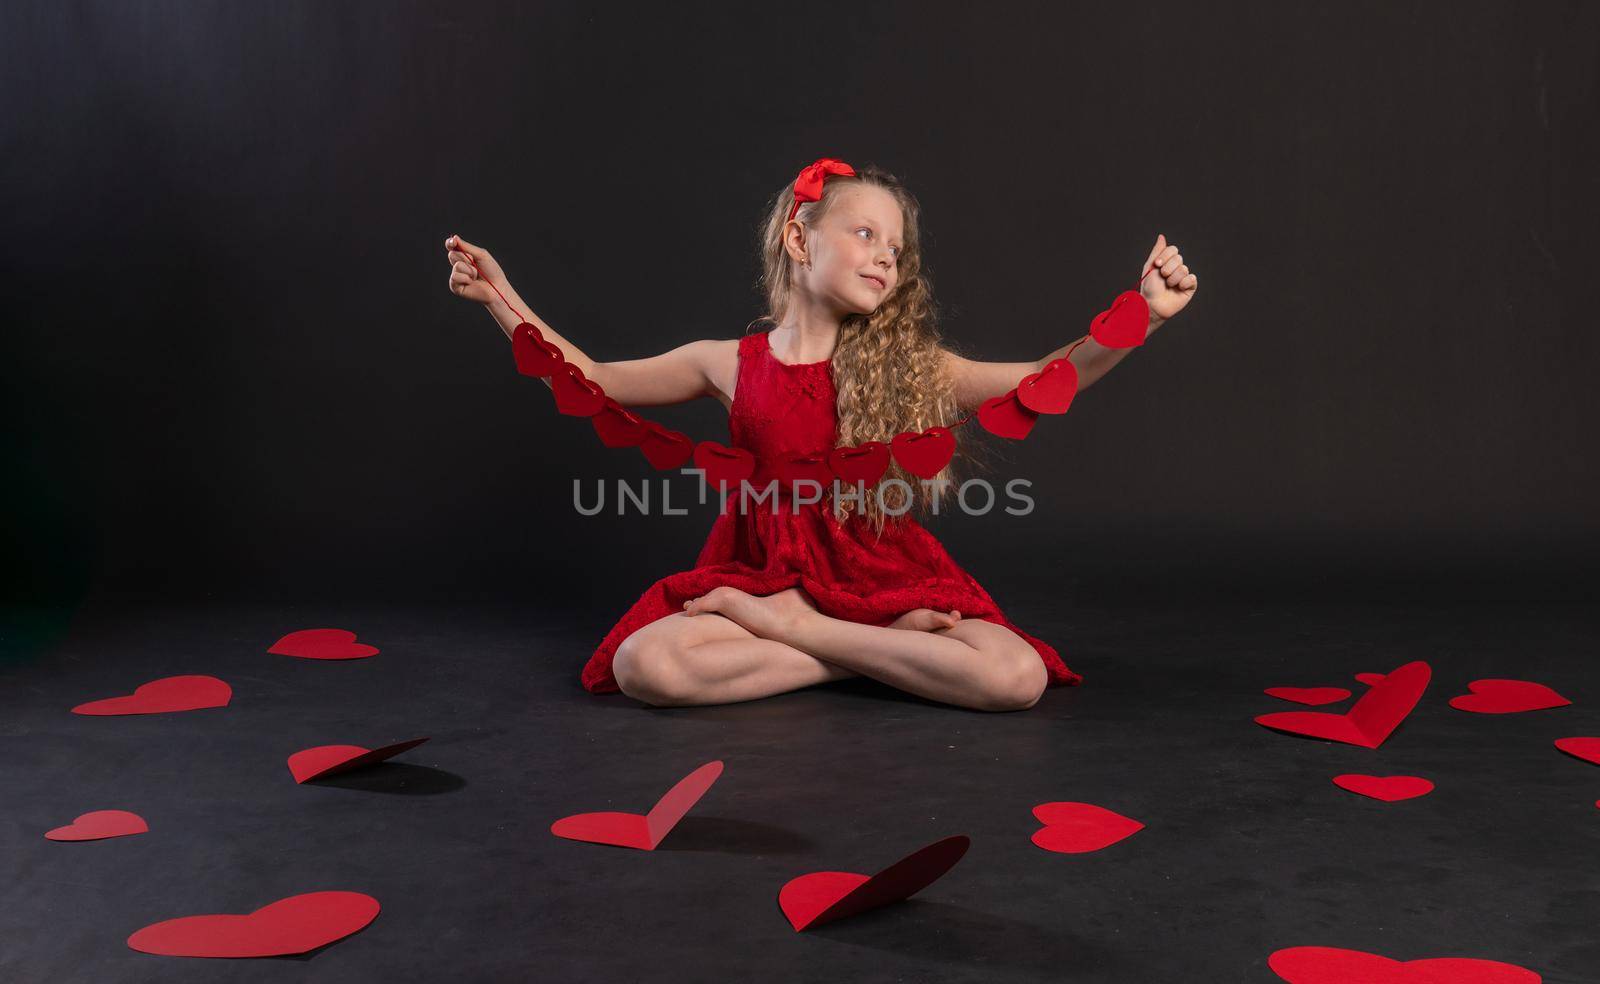 paper hearts valentine red, design, on the floor hearts married . the art form. emotion, engagement in a red dress girl, barefoot by 89167702191